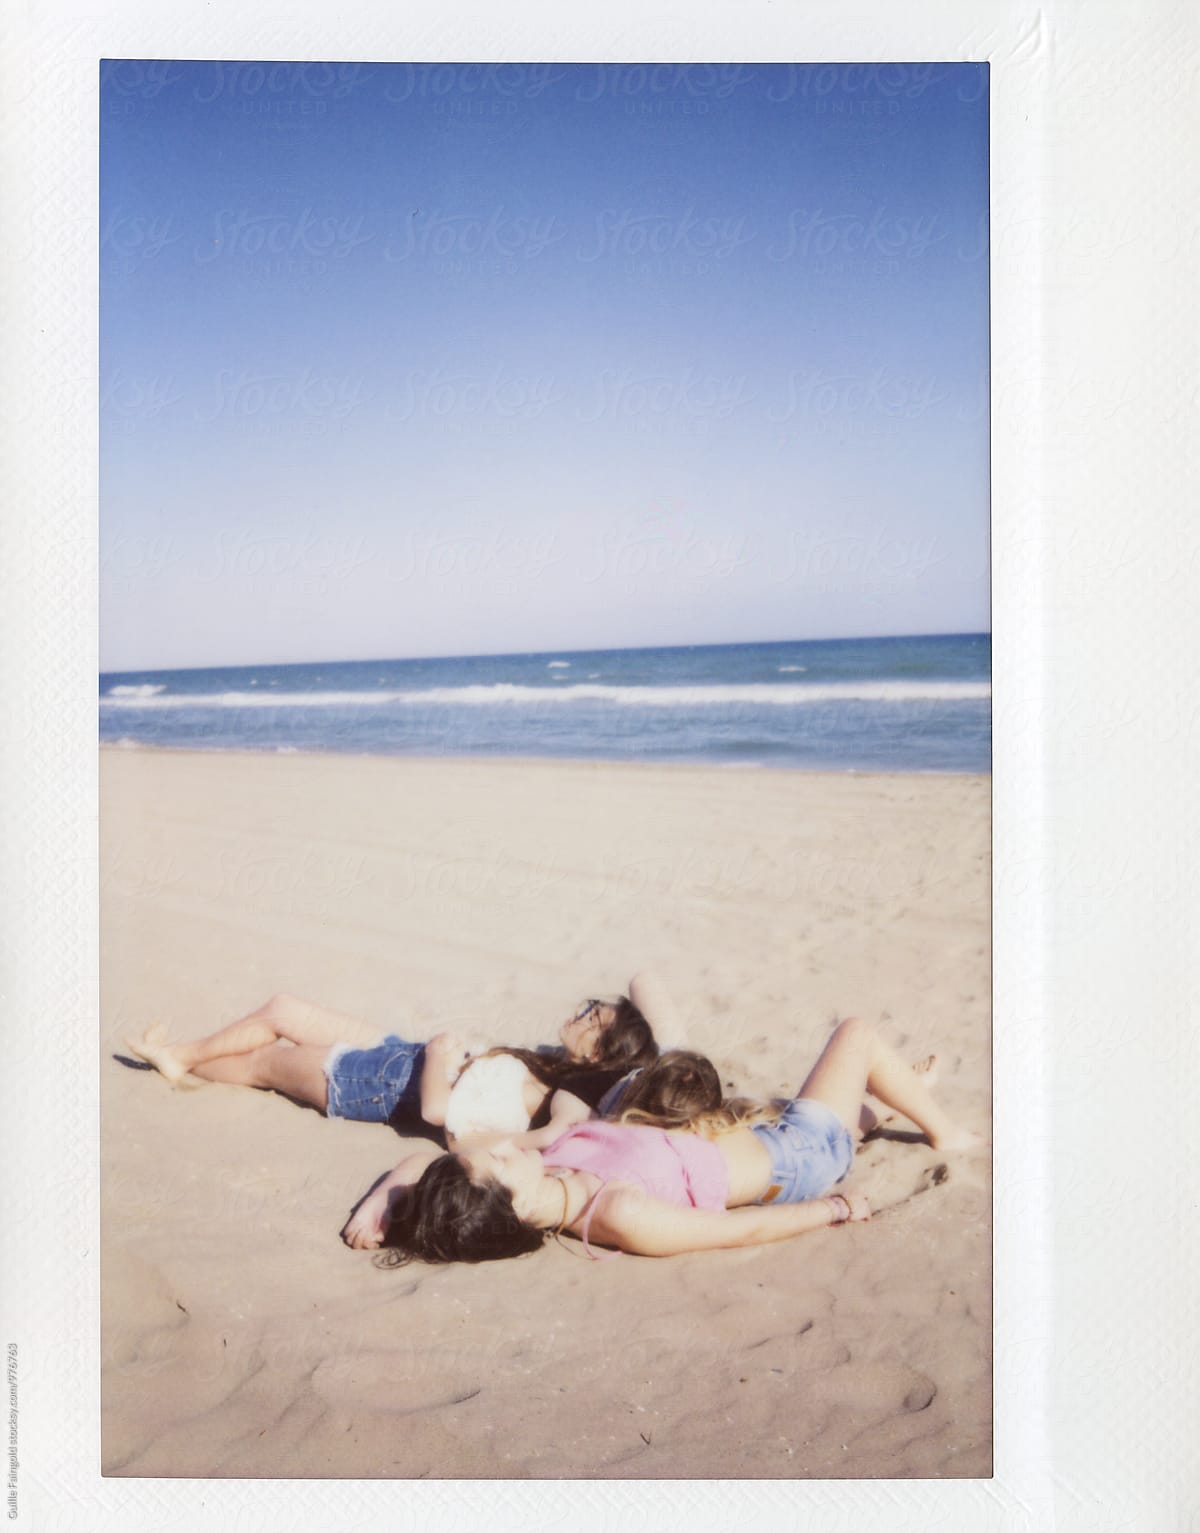 Girls Relaxing On Beach By Stocksy Contributor Guille Faingold Stocksy